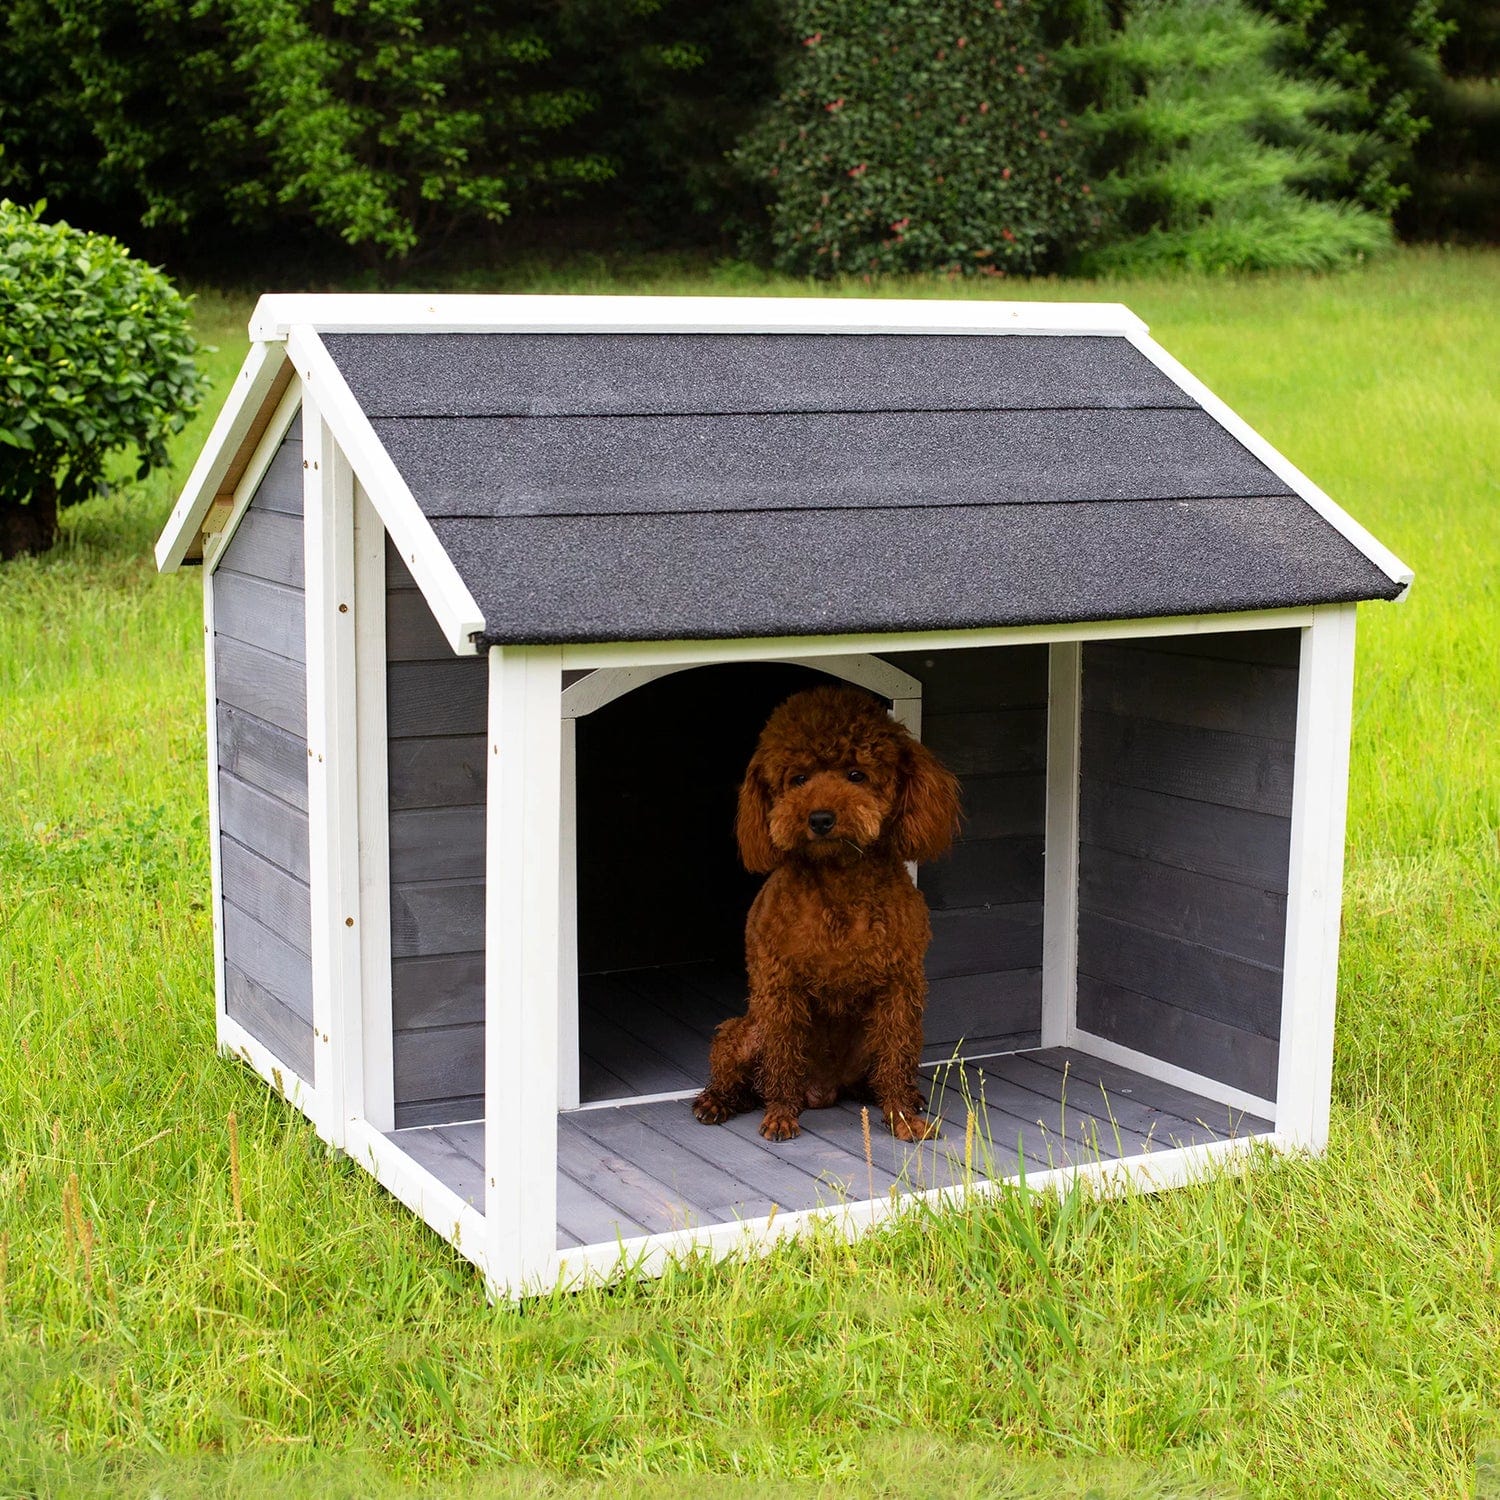 Wooden Dog Houses, Weatherproof Indoor and Outdoor Dog Kennel with Raised Feet for Small Dogs Medium Dogs and Large Dogs, Light Gray